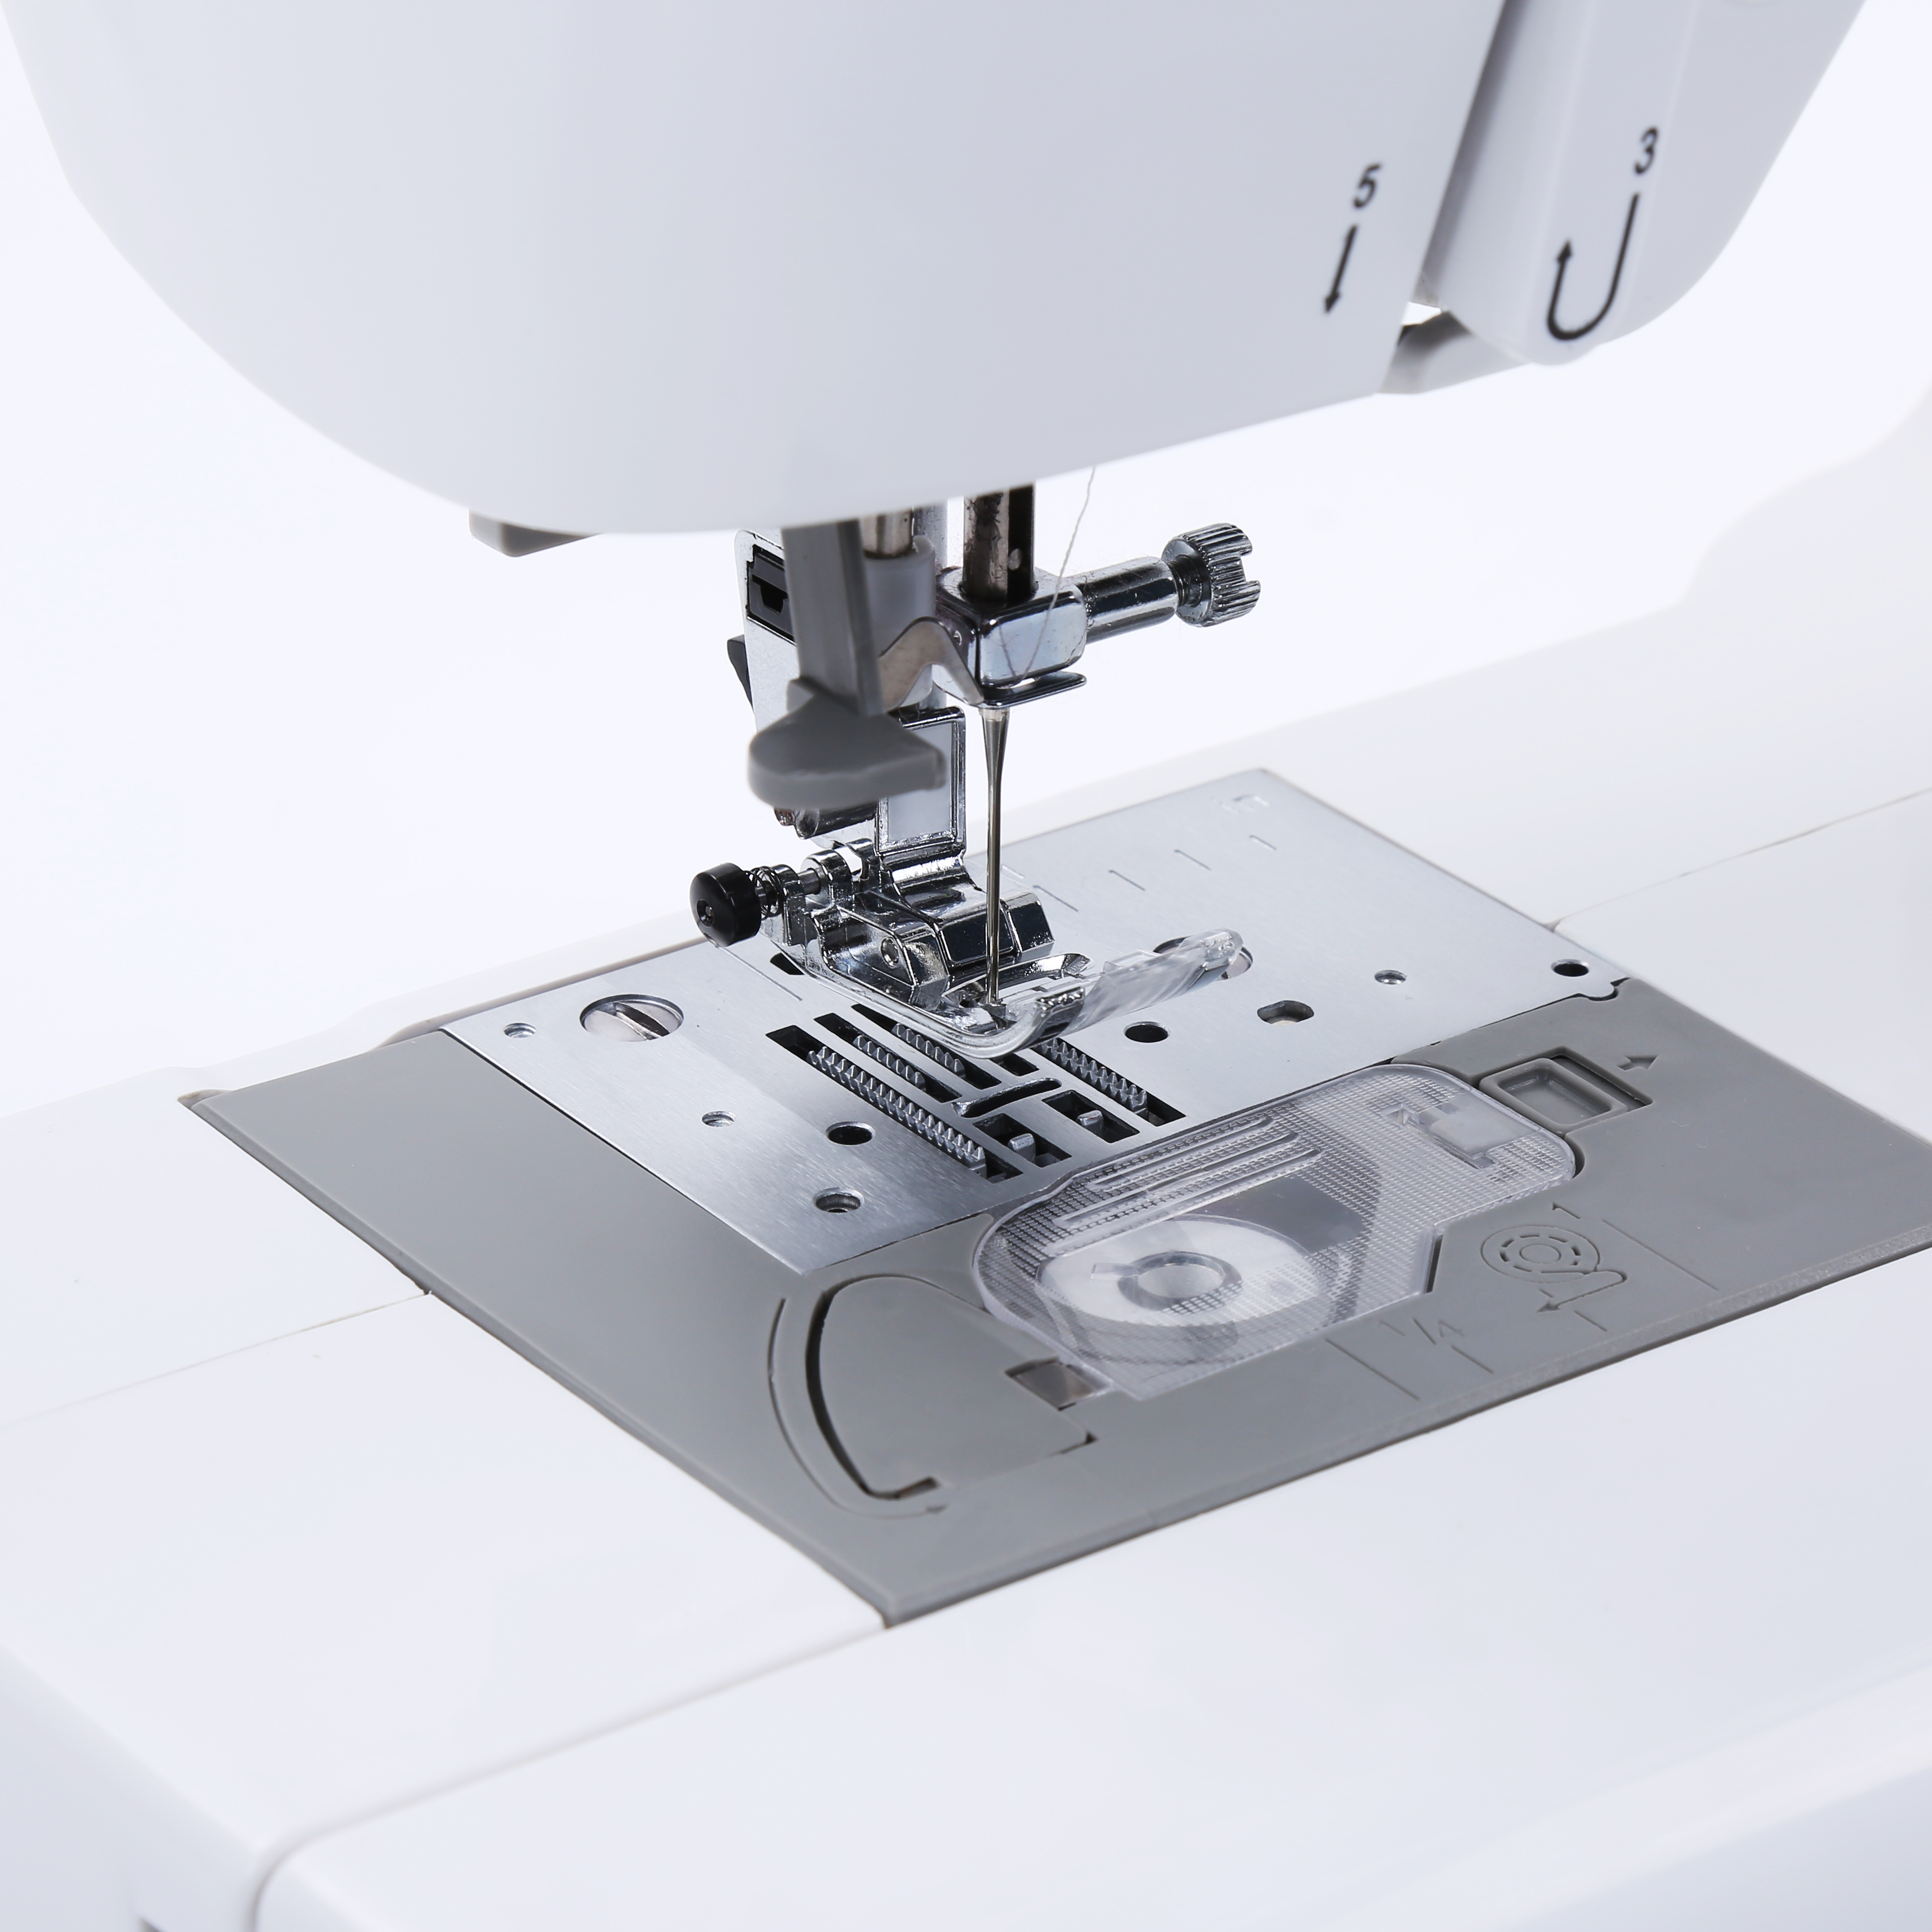 BAI Post Bed Sewing Machine Industrial for Janom Sewing Machin Embroidery